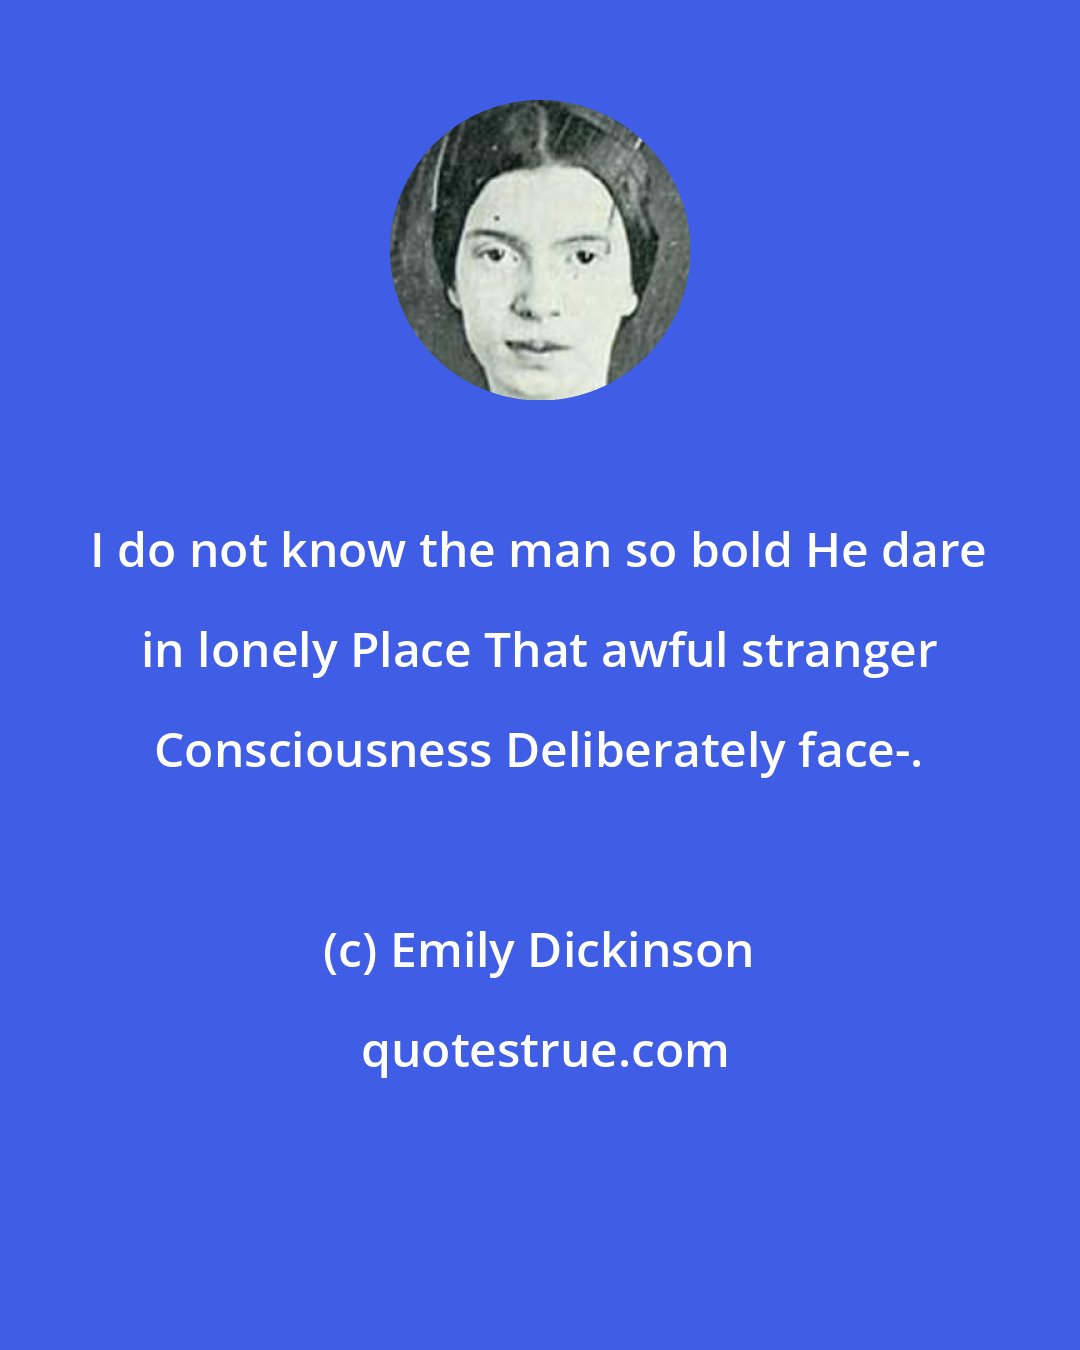 Emily Dickinson: I do not know the man so bold He dare in lonely Place That awful stranger Consciousness Deliberately face-.